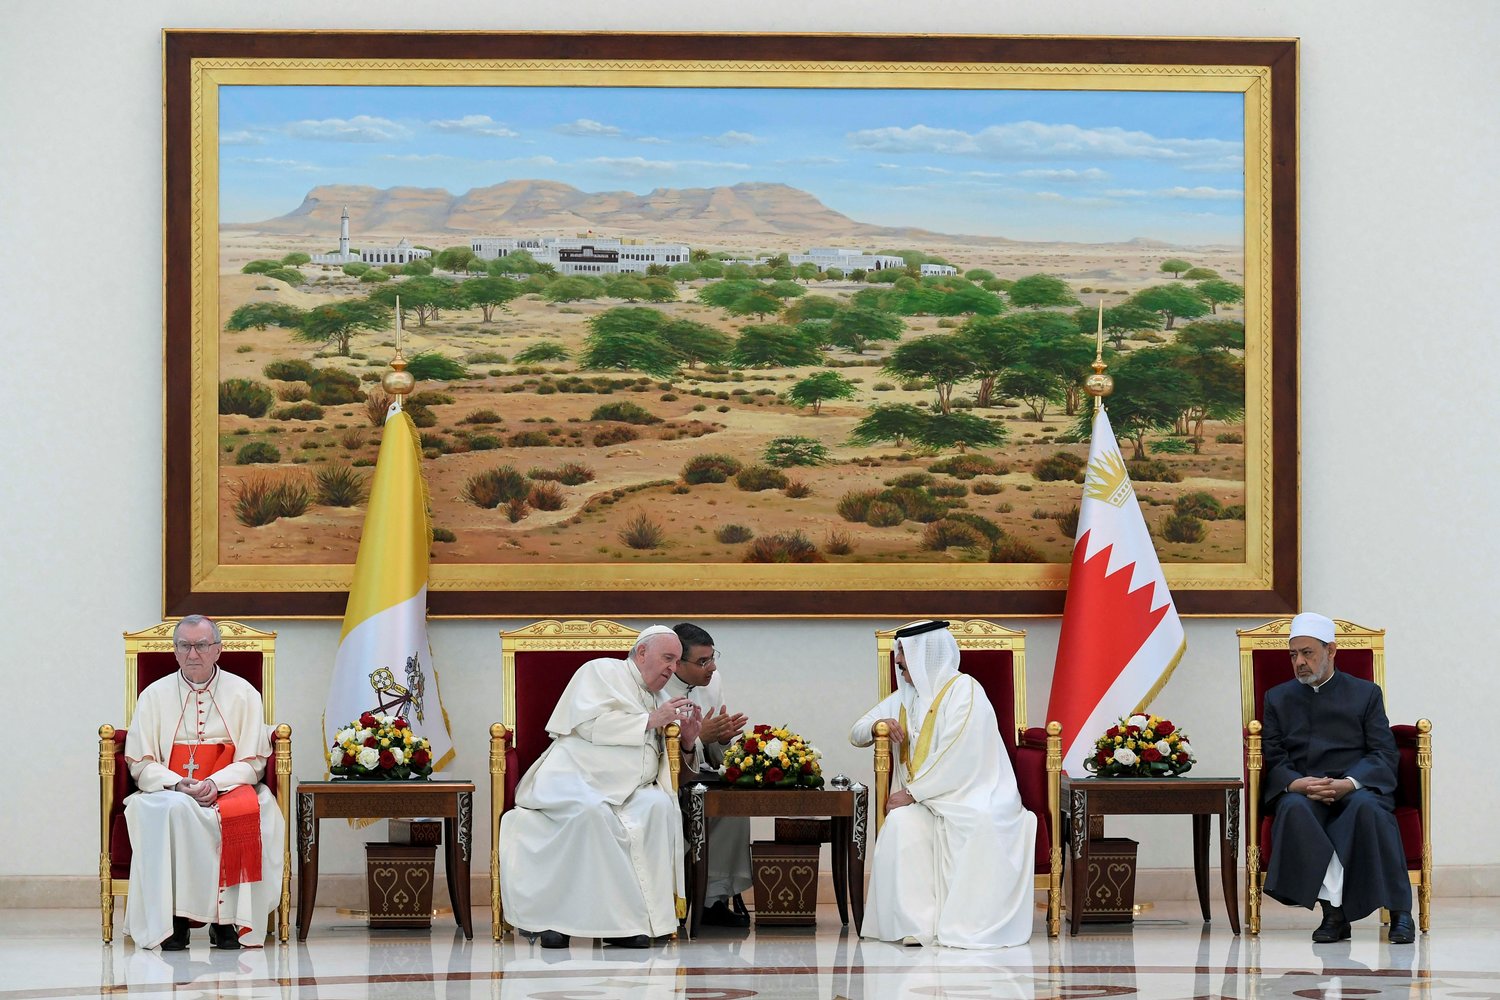 Pope Francis and Bahrain’s King Hamad bin Isa Al Khalifa speak at a farewell ceremony for the pope Nov. 6 at Sakhir air base in Awali. Also pictured is Cardinal Pietro Parolin, Vatican secretary of state, and Sheikh Ahmad el-Tayeb, grand imam of Egypt’s Al-Azhar mosque and university.